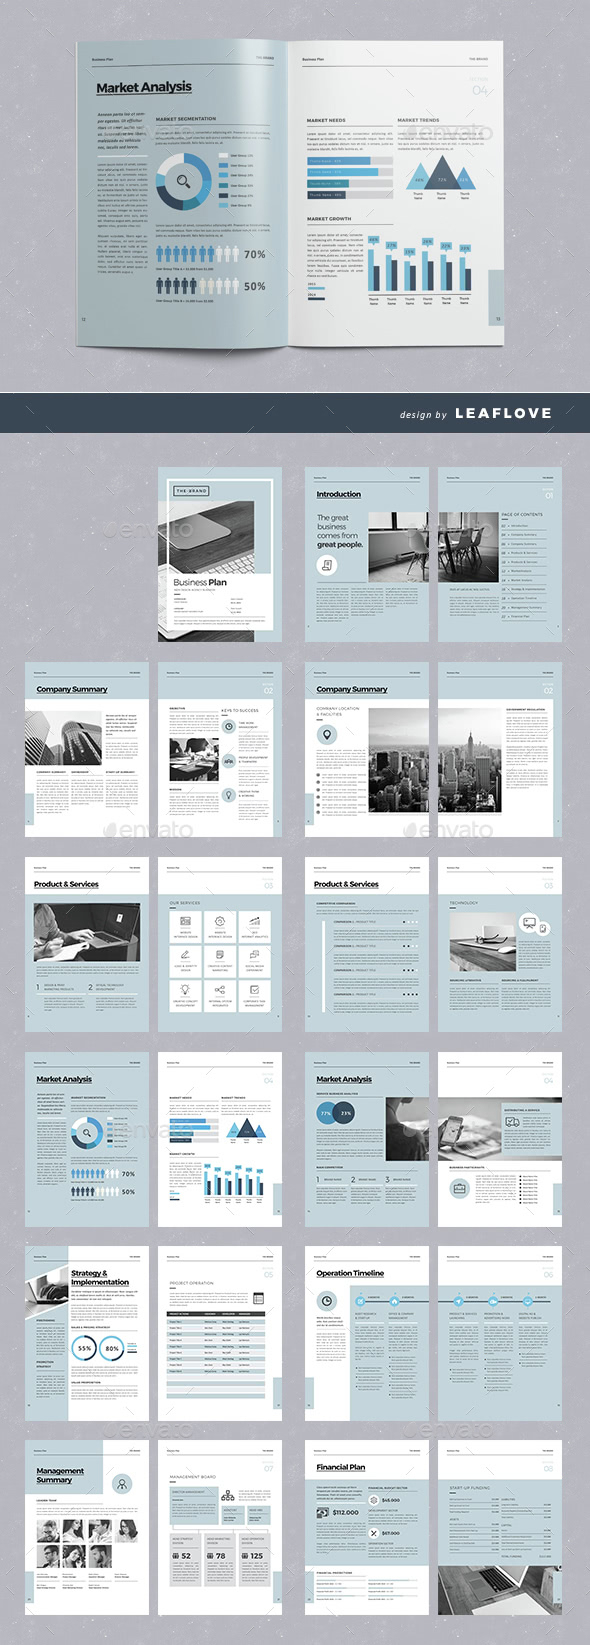 Indesign Business Plan Template Free The Company Profile For Indesign Presentation Templates